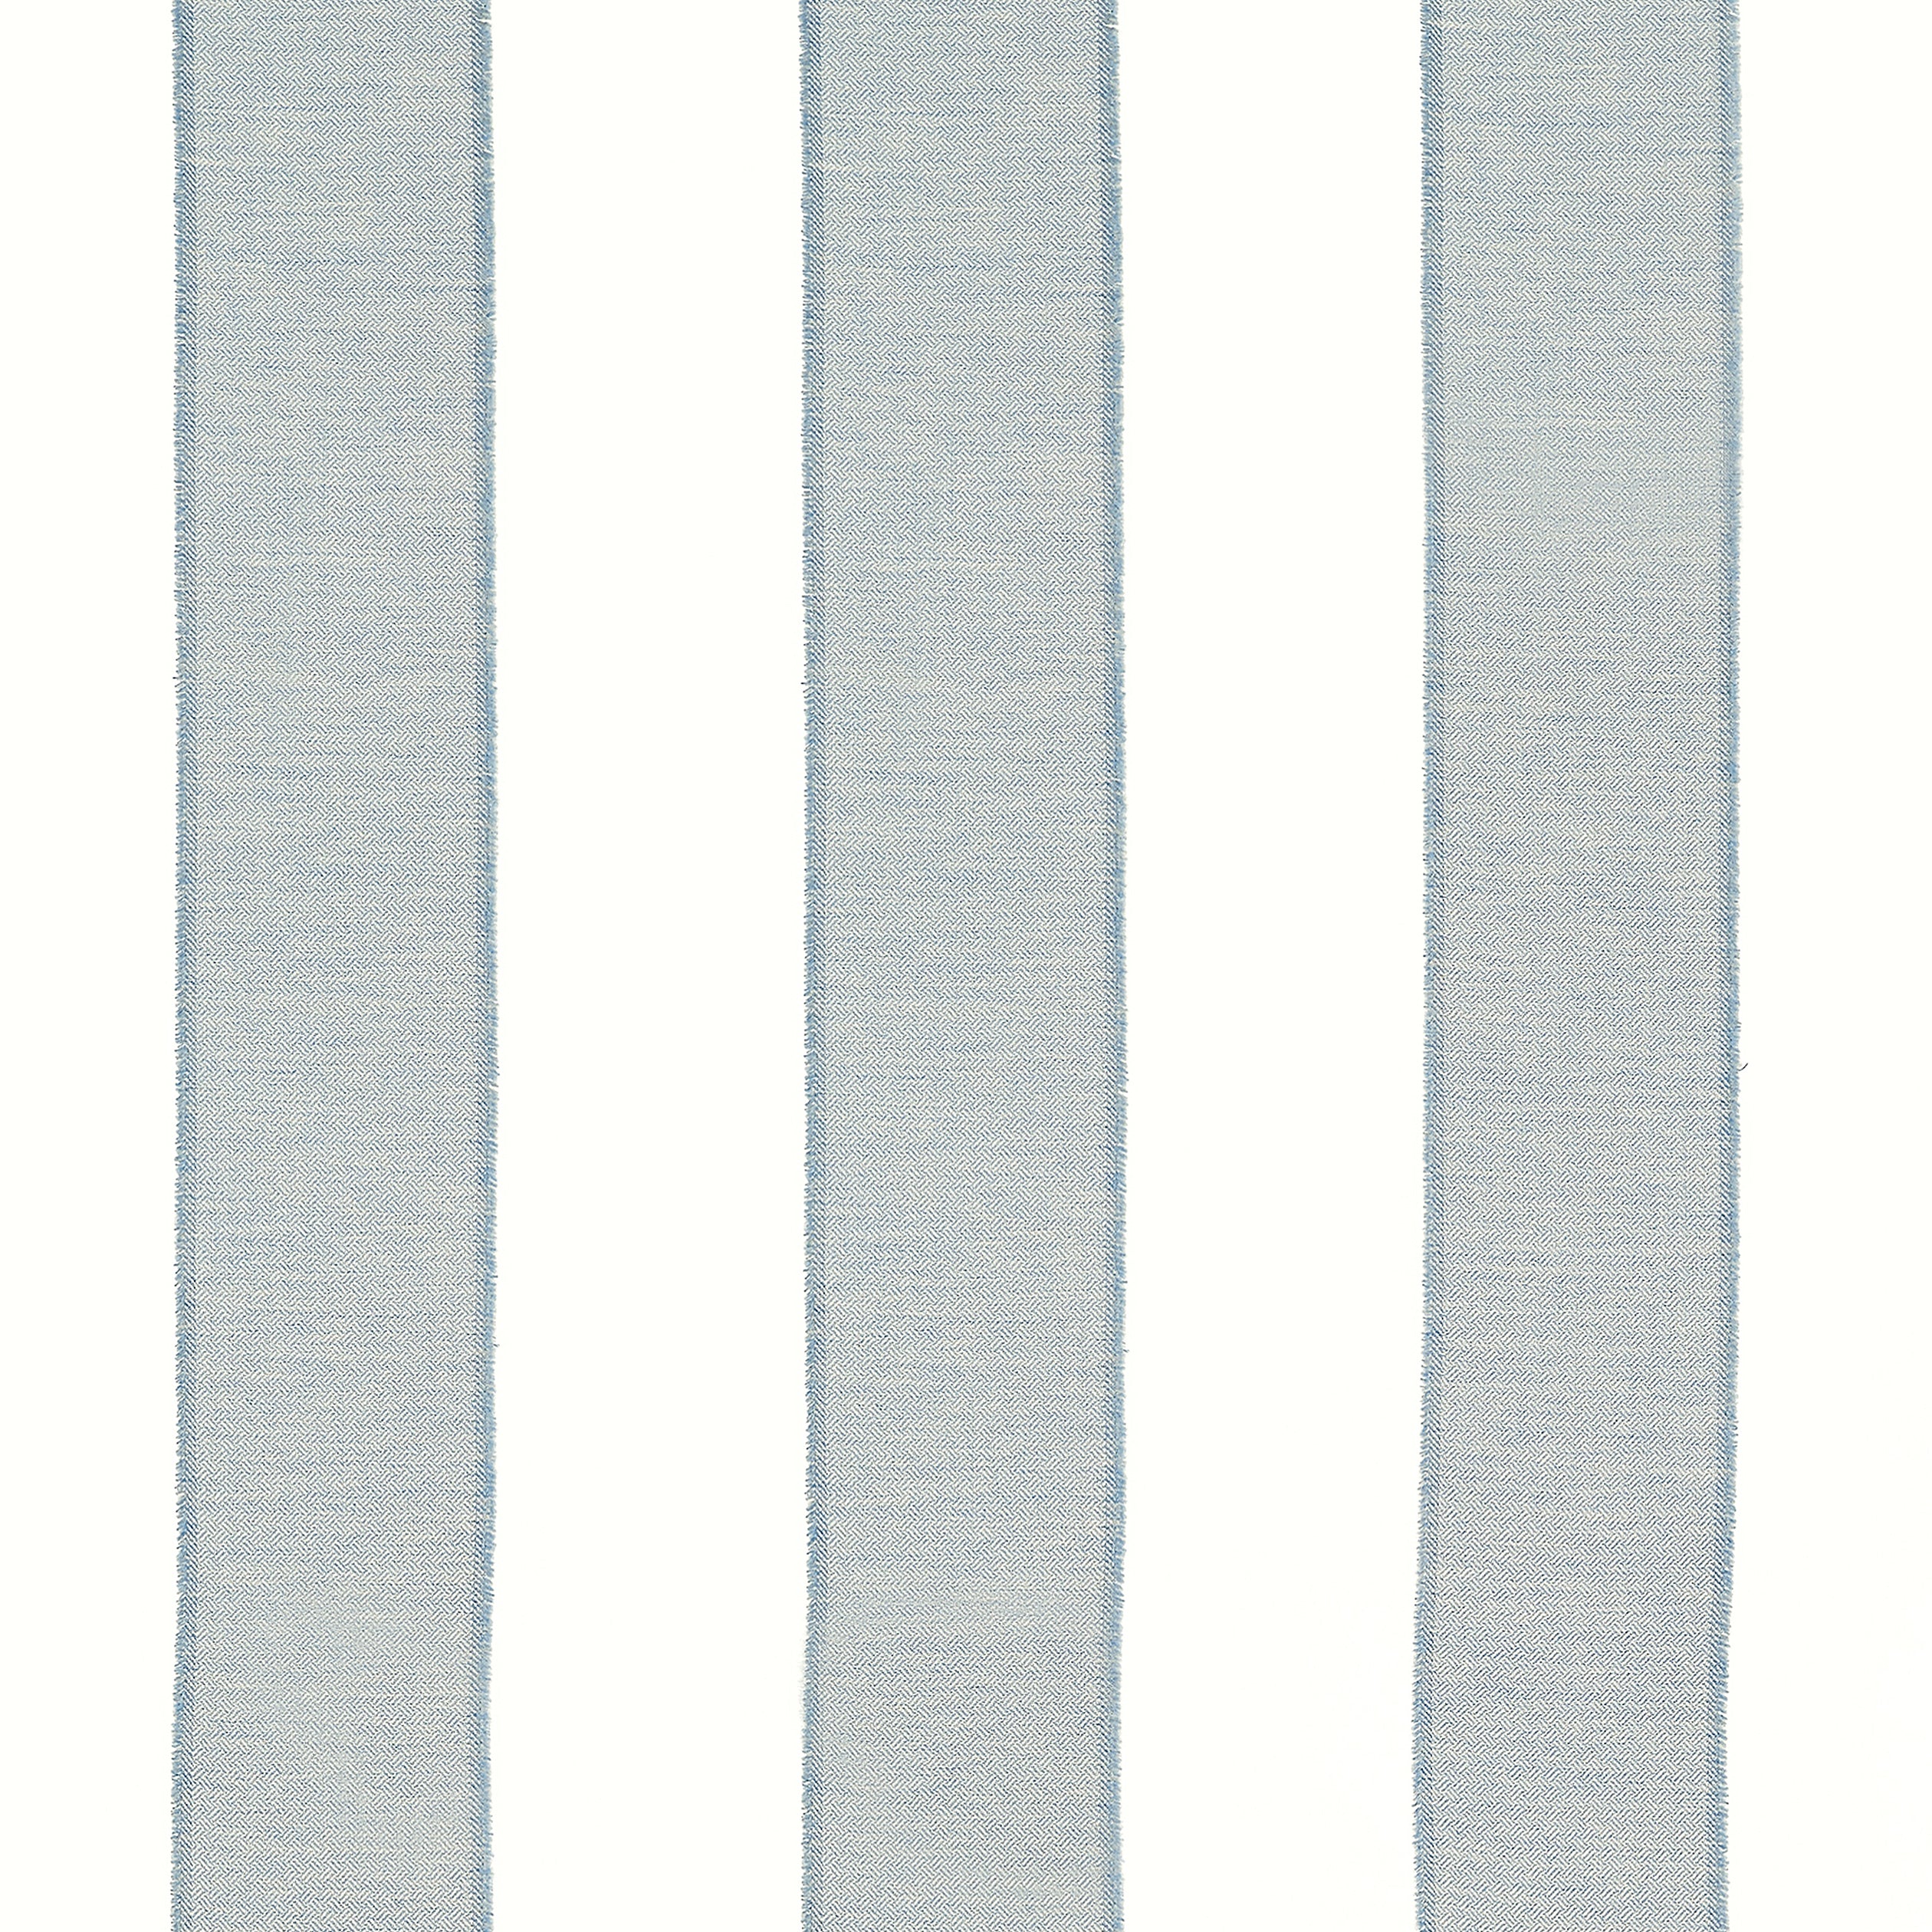 Intaglio Stripe fabric in spa blue color - pattern number FWW81744 - by Thibaut in the Locale Wide Width collection